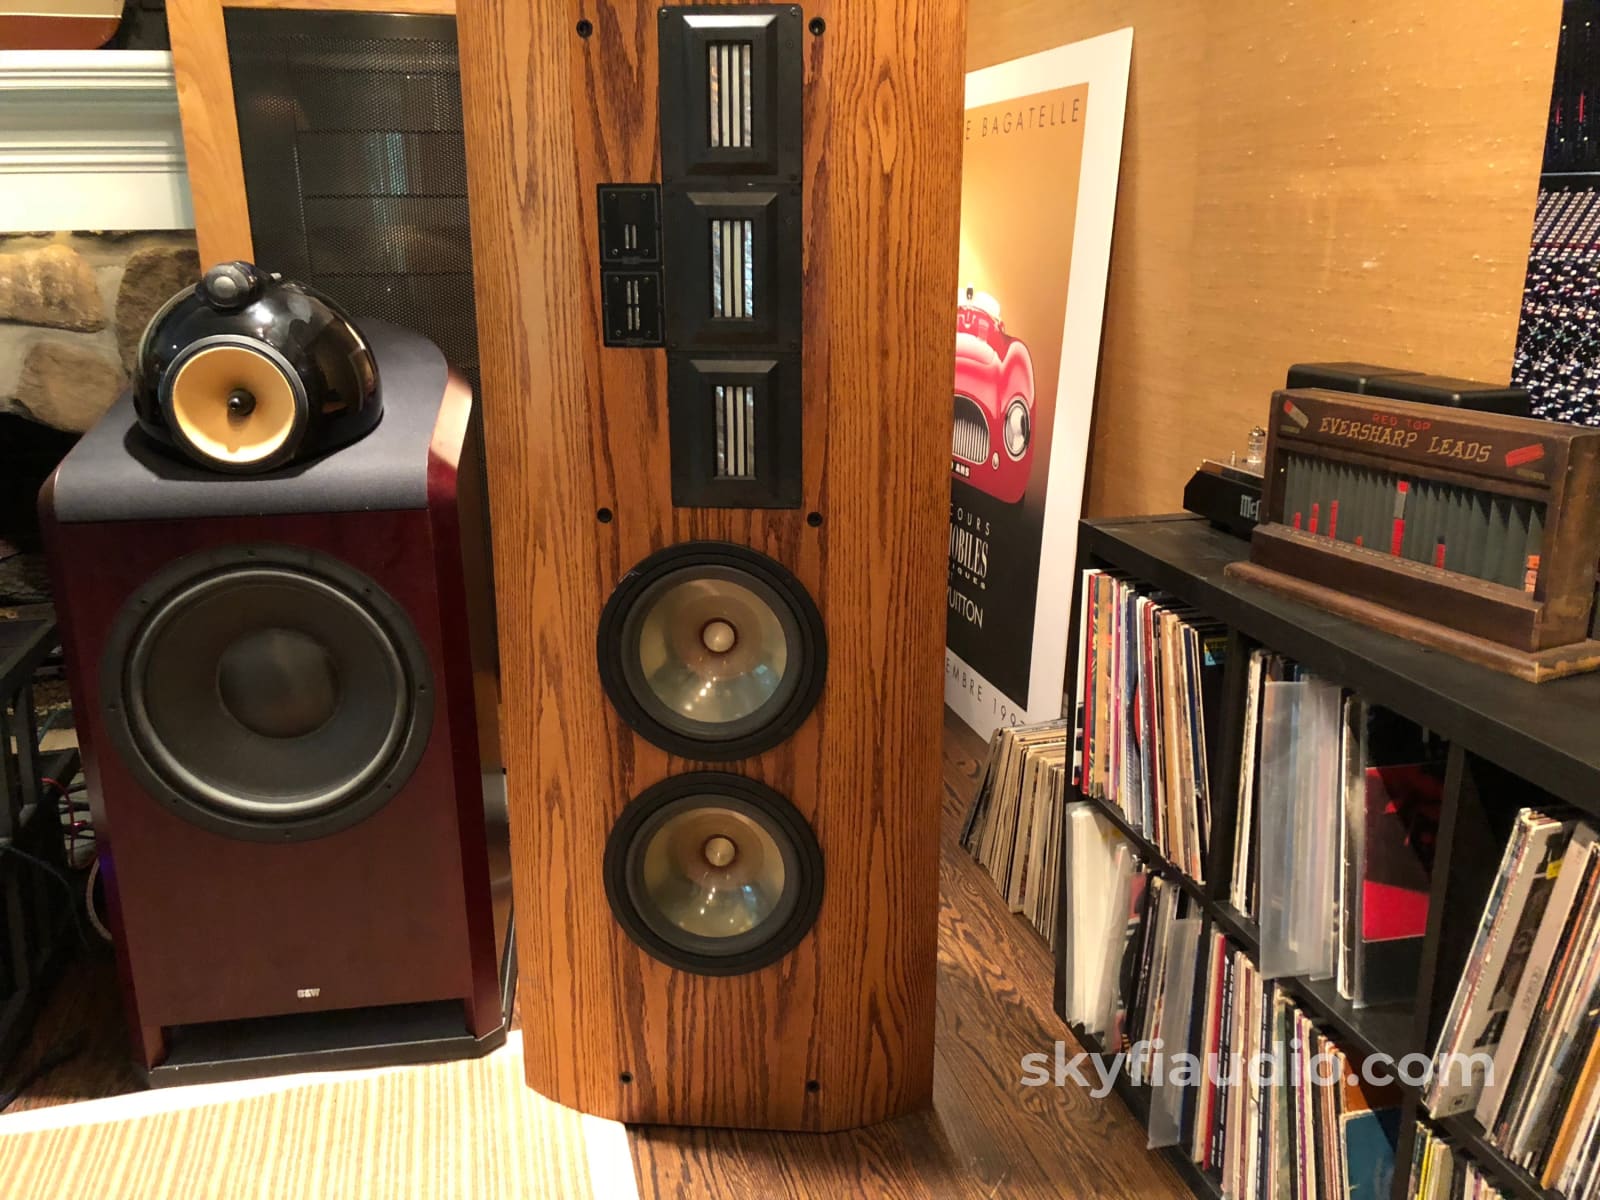 Infinity Reference Standard Rs Ii-B Vintage Ribbon Speakers With Lf Eq Near Perfect